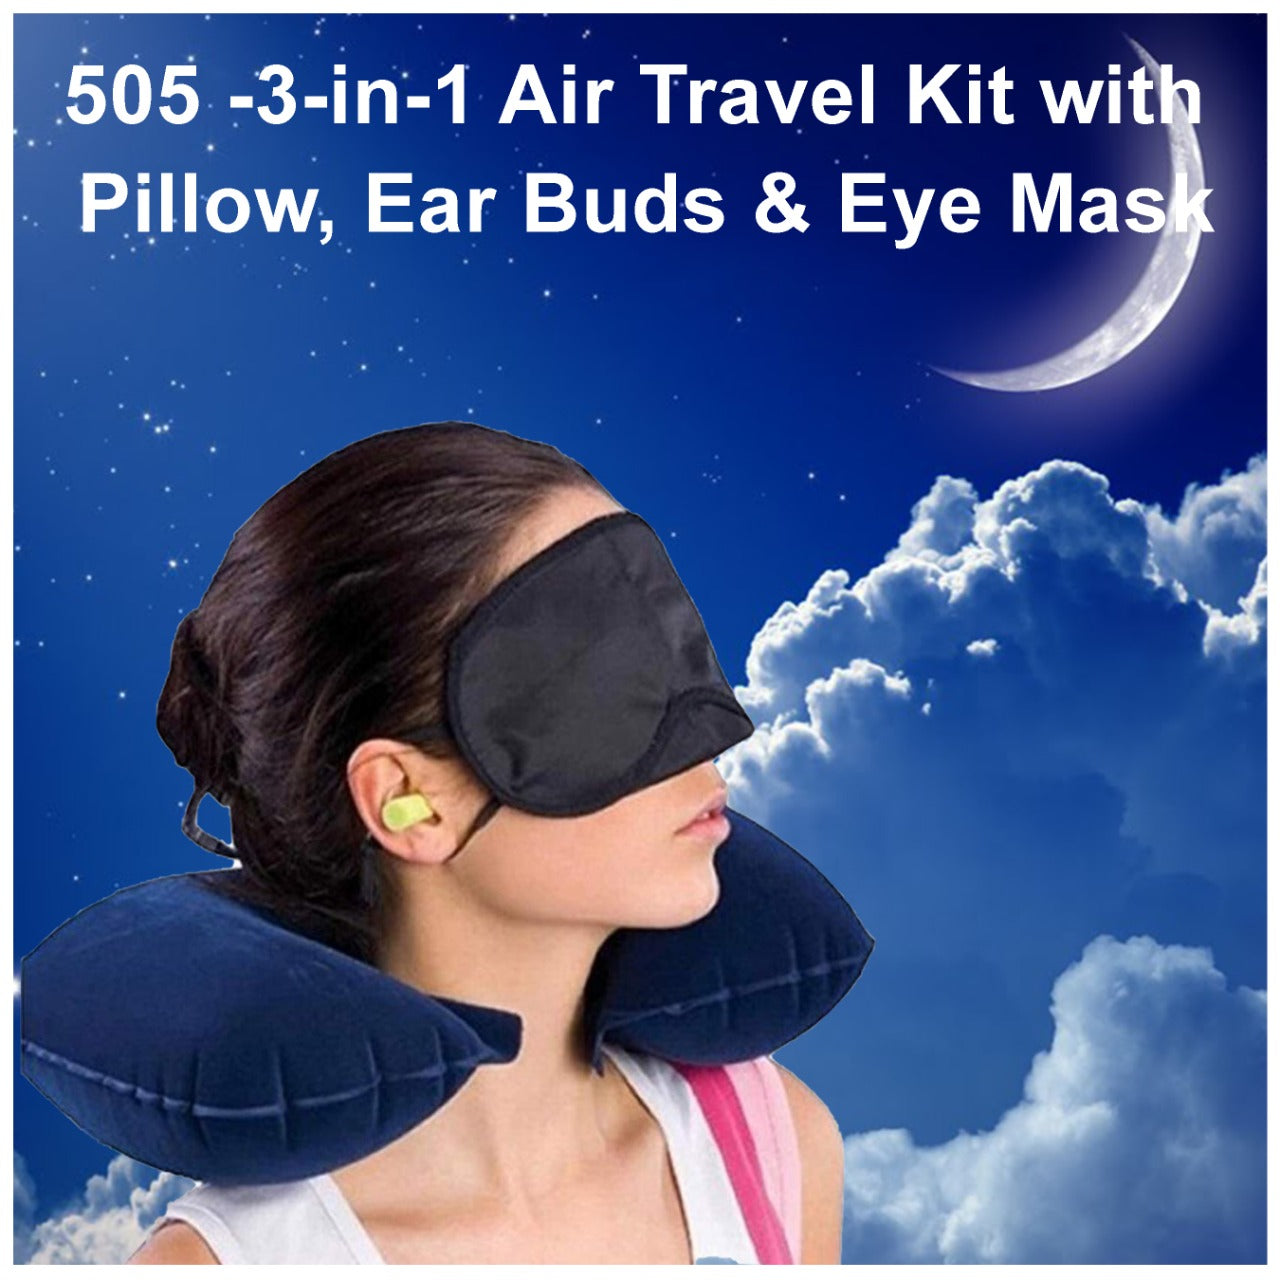 -3-in-1 Air Travel Kit with Pillow, Ear Buds & Eye Mask